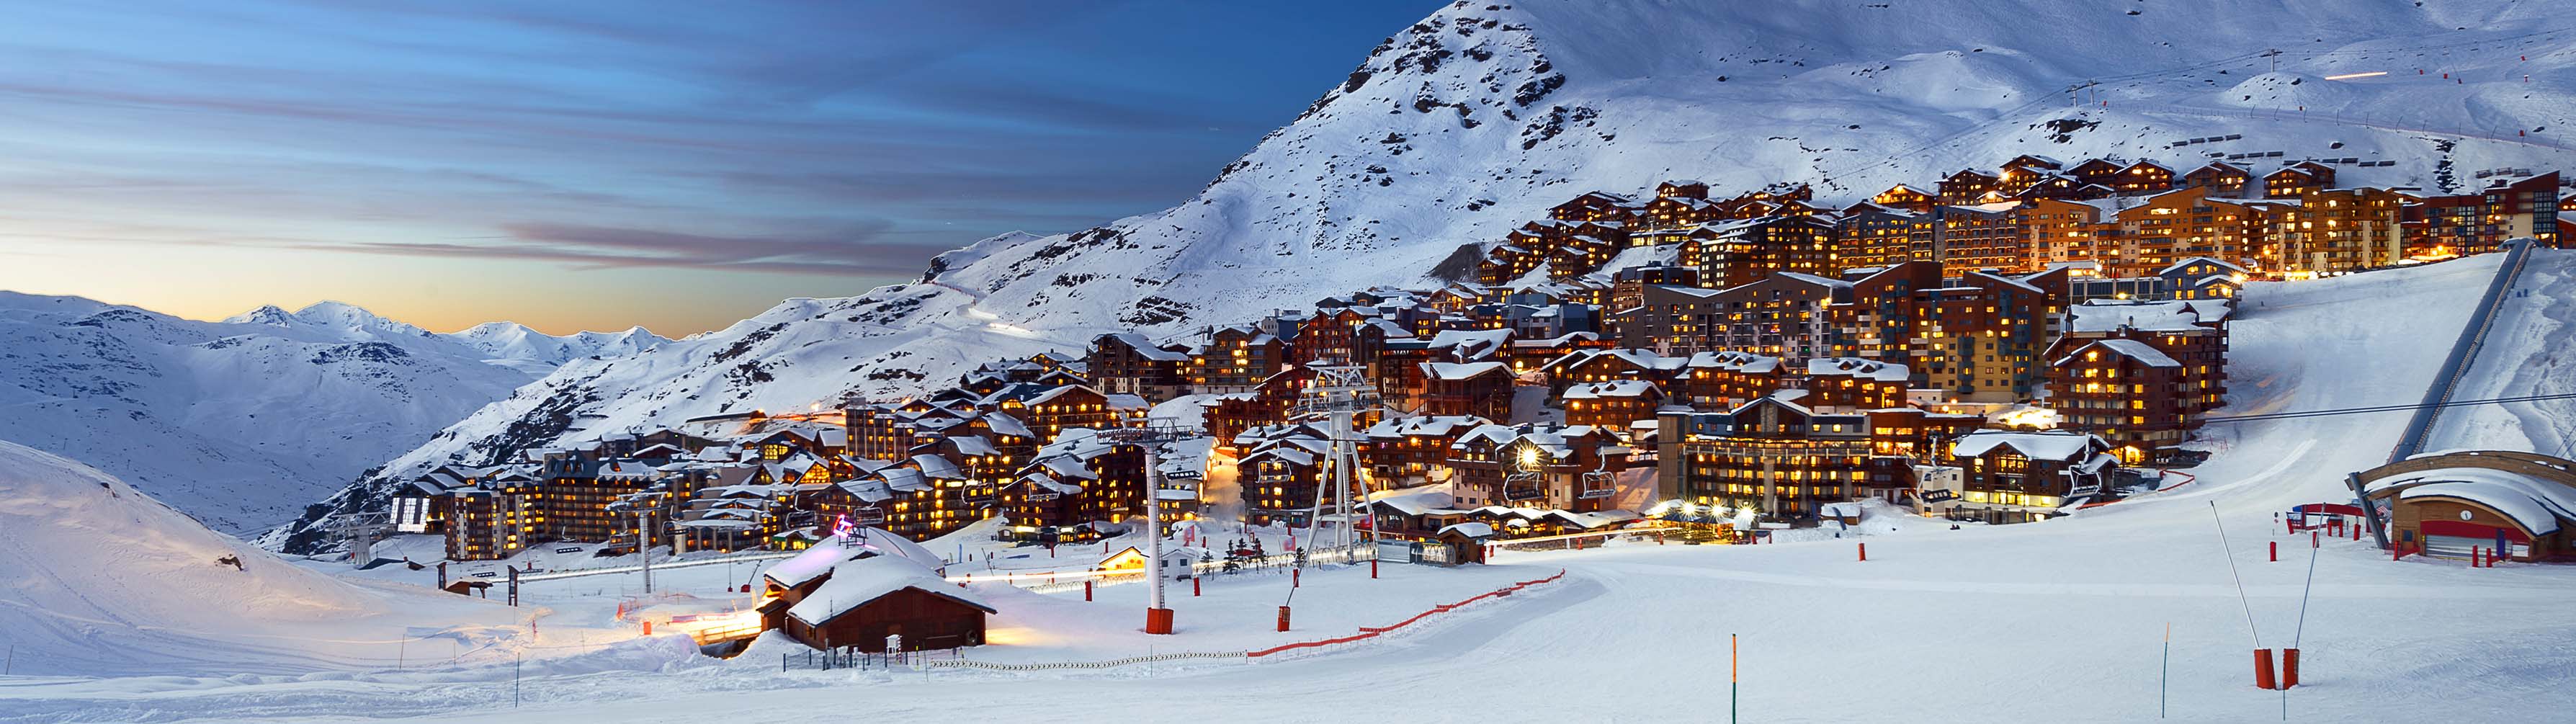 The white slopes and chalets of Val Thorens lit up at night.